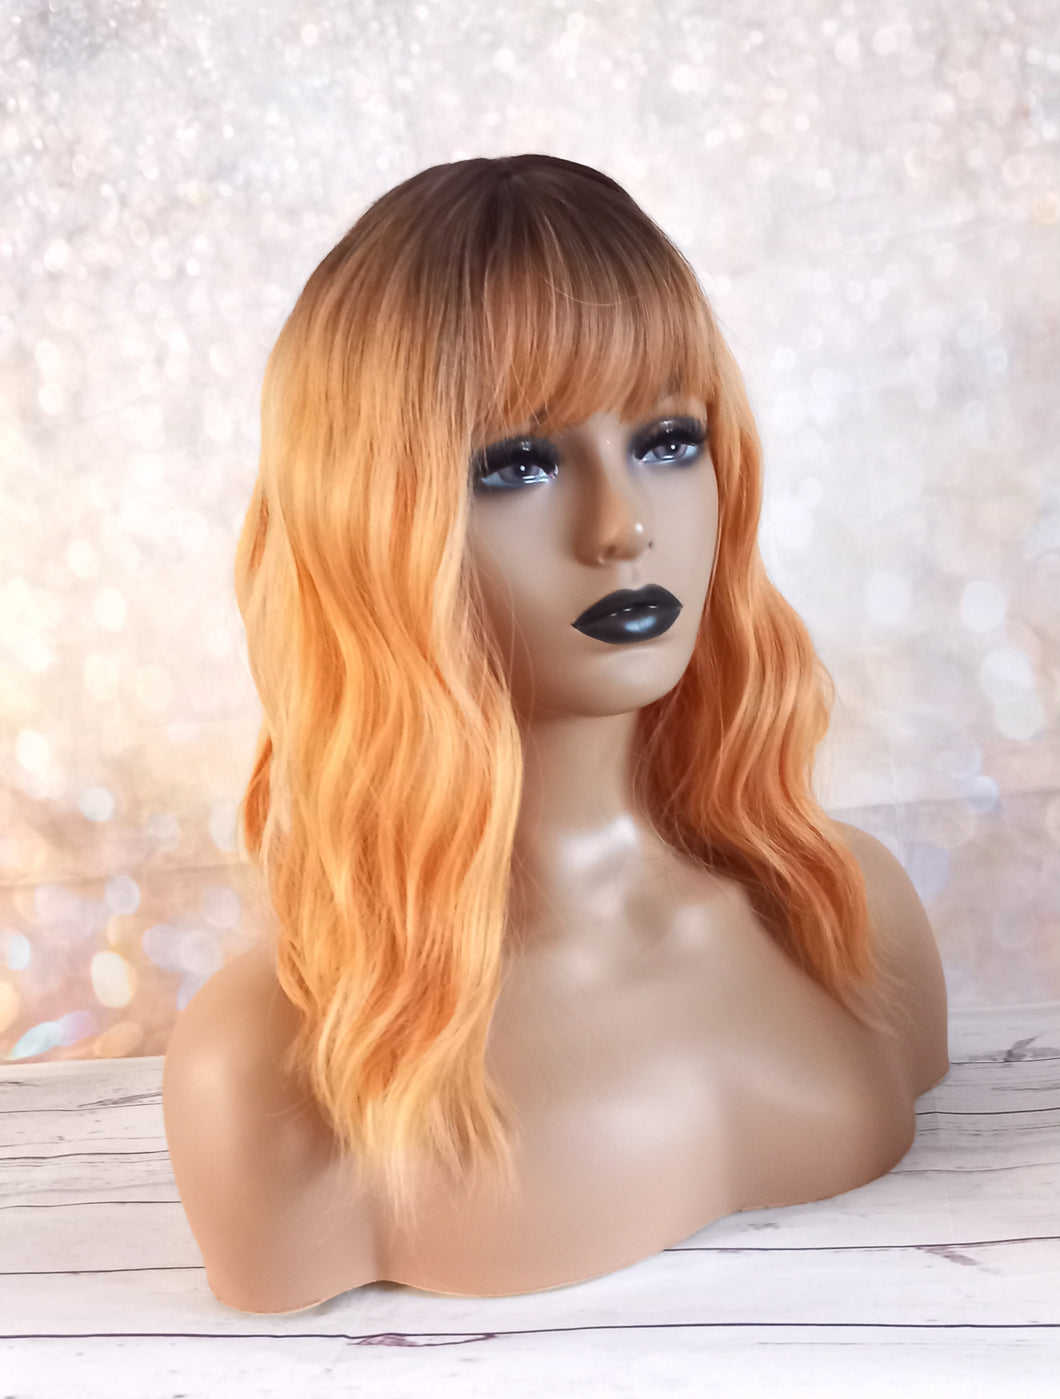 Clearance- Immediate despatch- golden amber yellow rooted Fibre bob wig, synthetic, fringe, bangs, 8 inches long, wavy texture